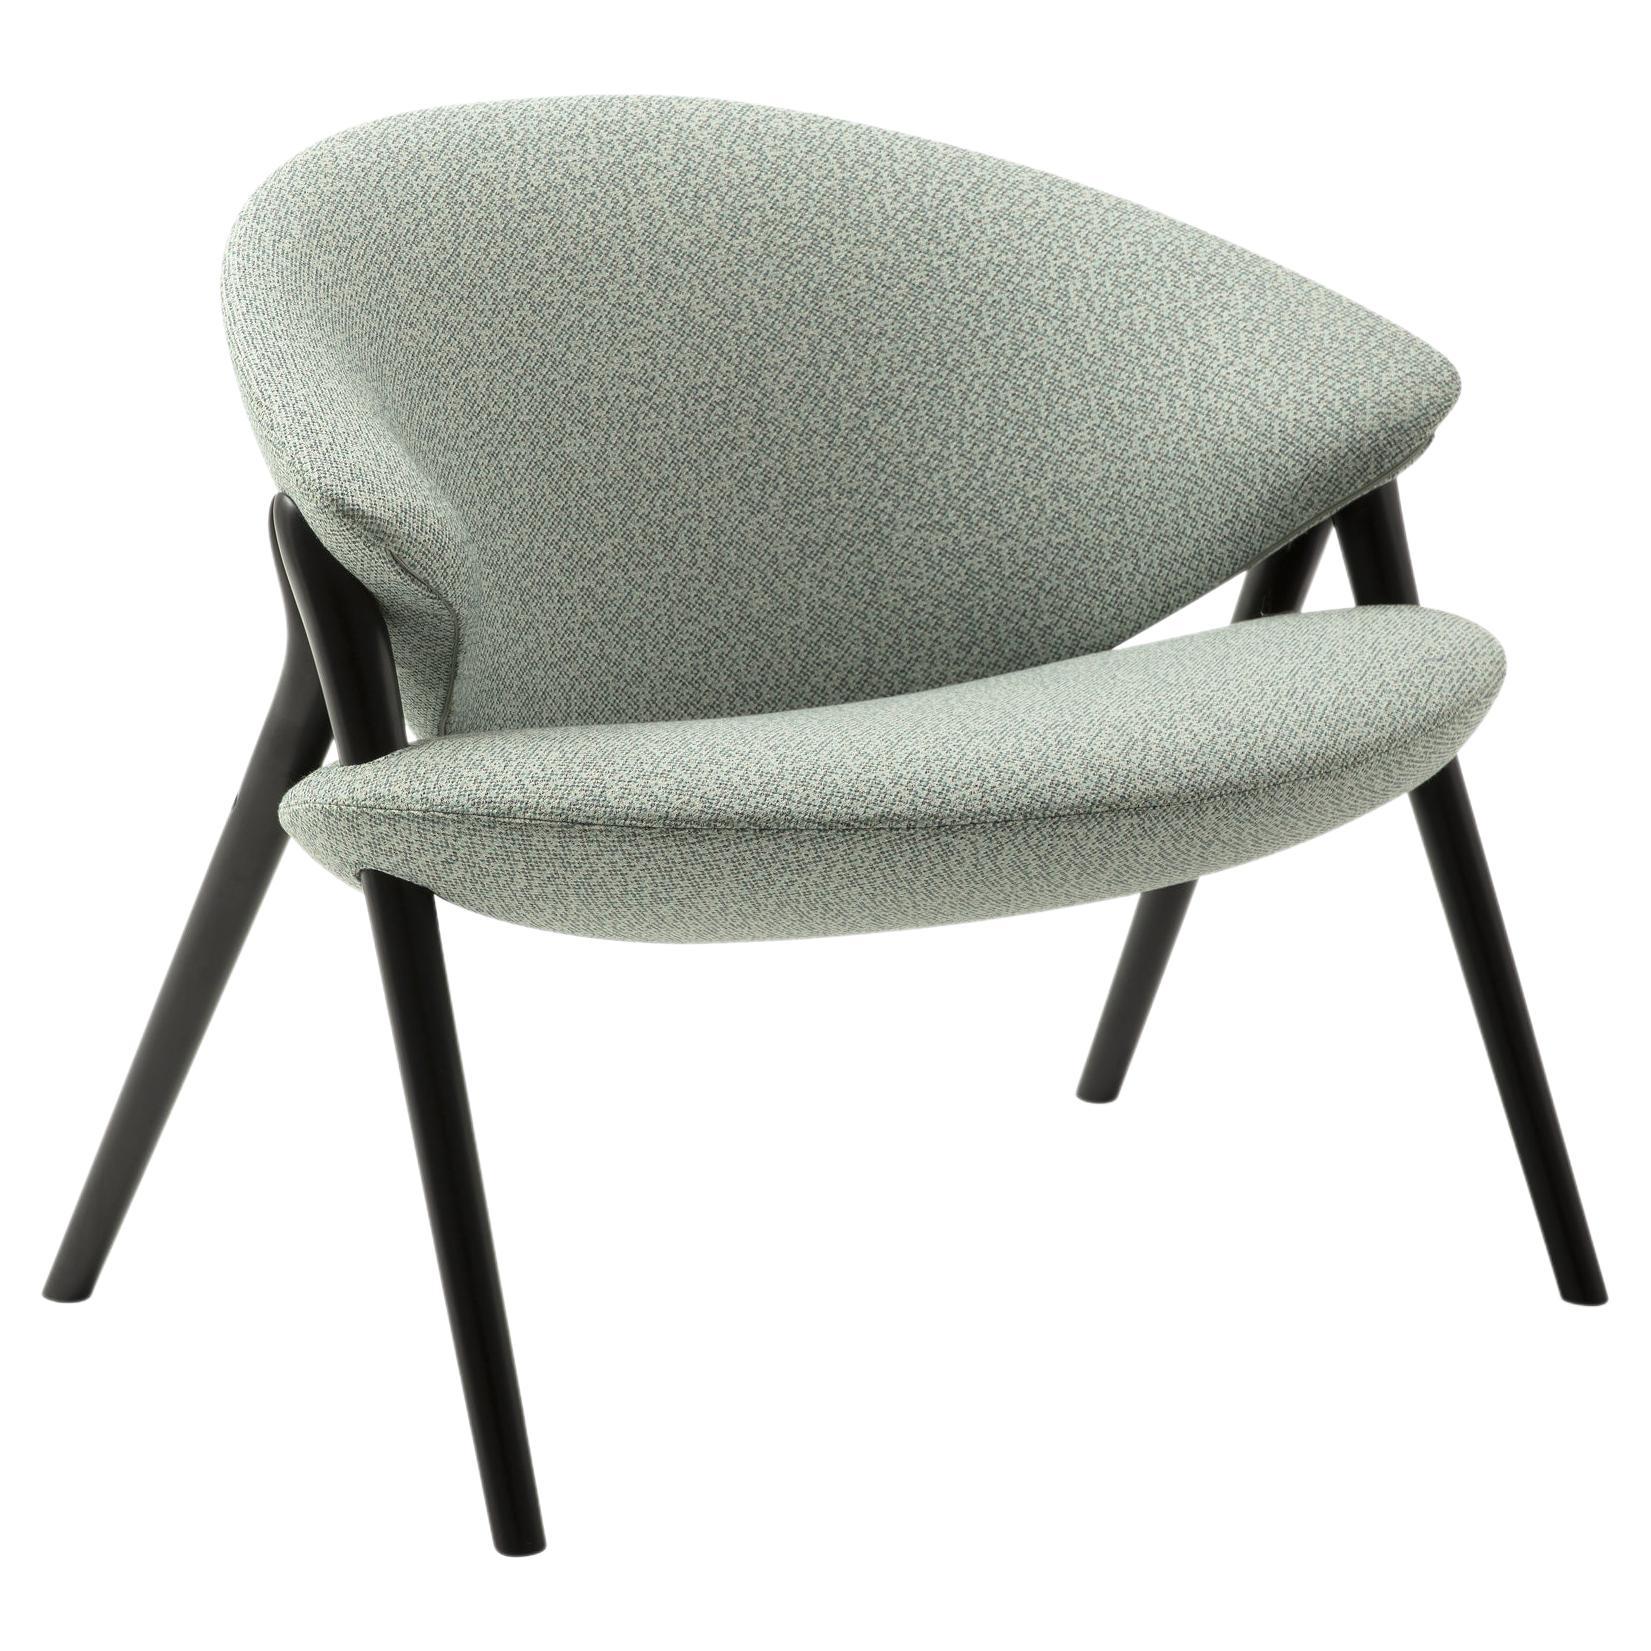 Zanotta Oliva Armchair in Green Upholstery with Black Laquered Maple Wood Frame For Sale